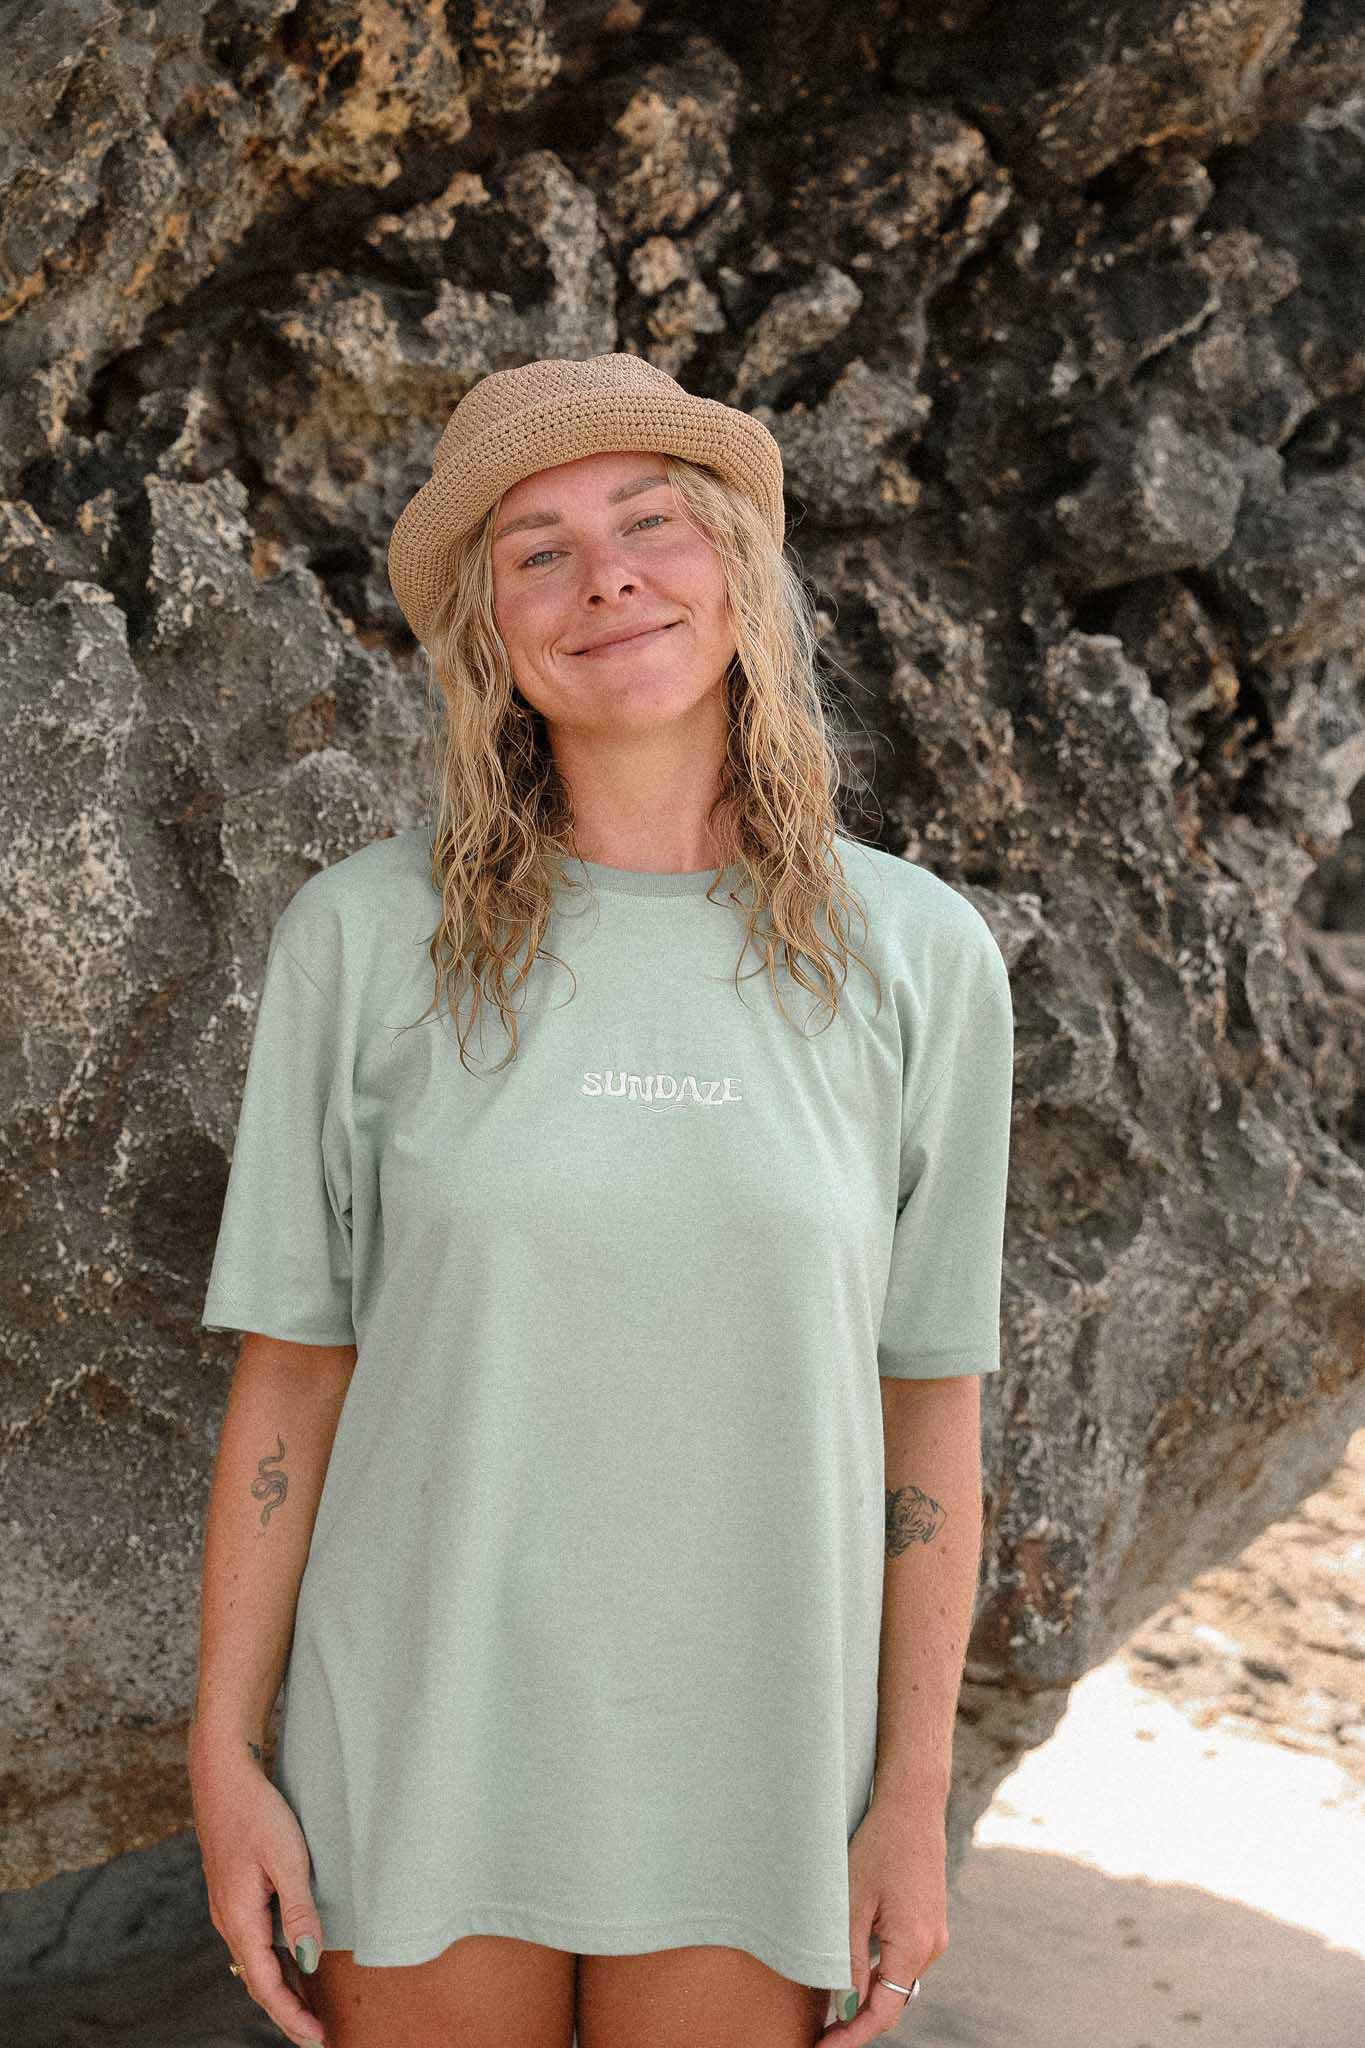 Woman posing from the front wearing a sage green t-shirt with sundaze logo embroidered on the front